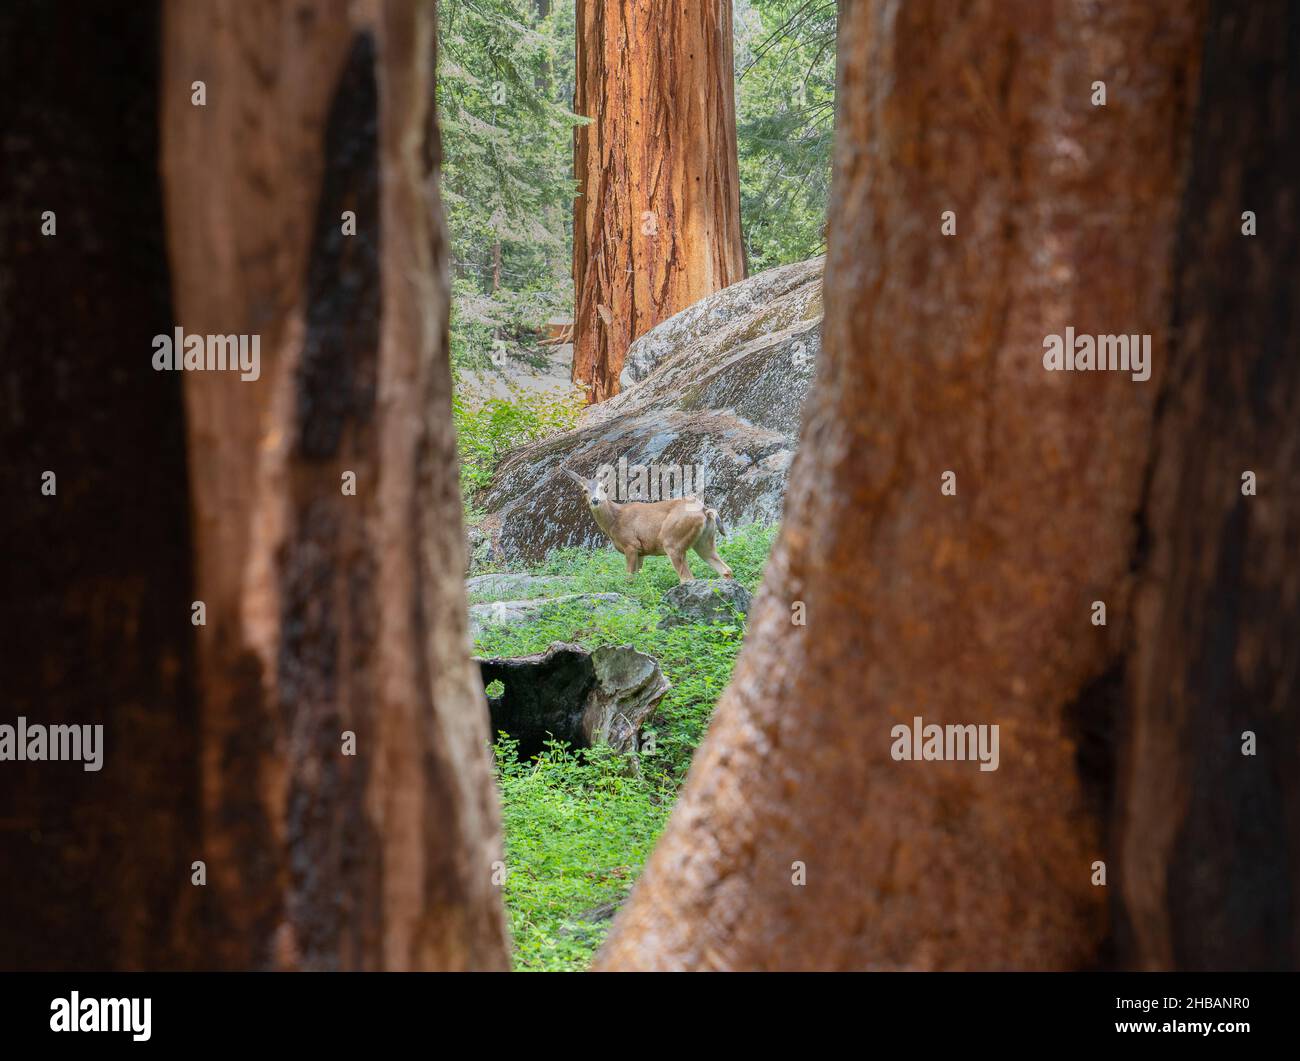 A young deer between two sequoias in Giant Forest. Sequoia & Kings Canyon National Parks, California, United States of America.  A unique, optimised version of a NPS image - Credit: NPS Stock Photo